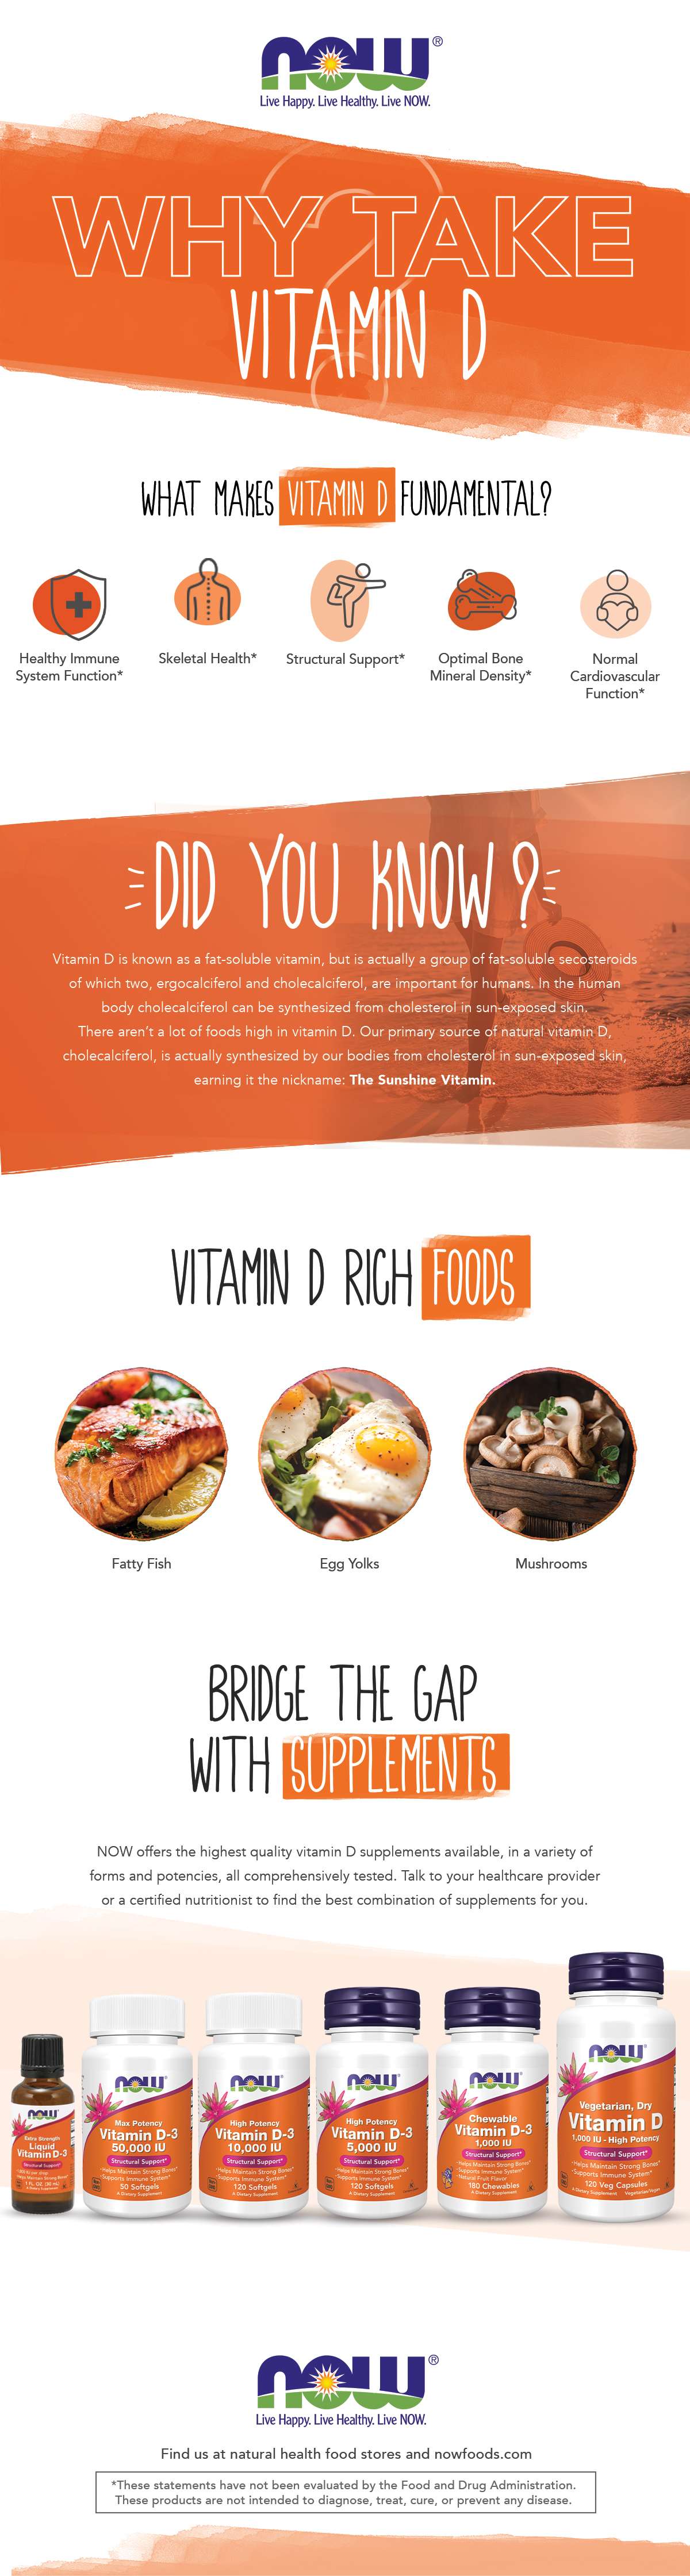 Benefits of vitamin D told in a graphic format with images of NOW vitamin D products, people living a healthy lifestyle aon a white and orange background